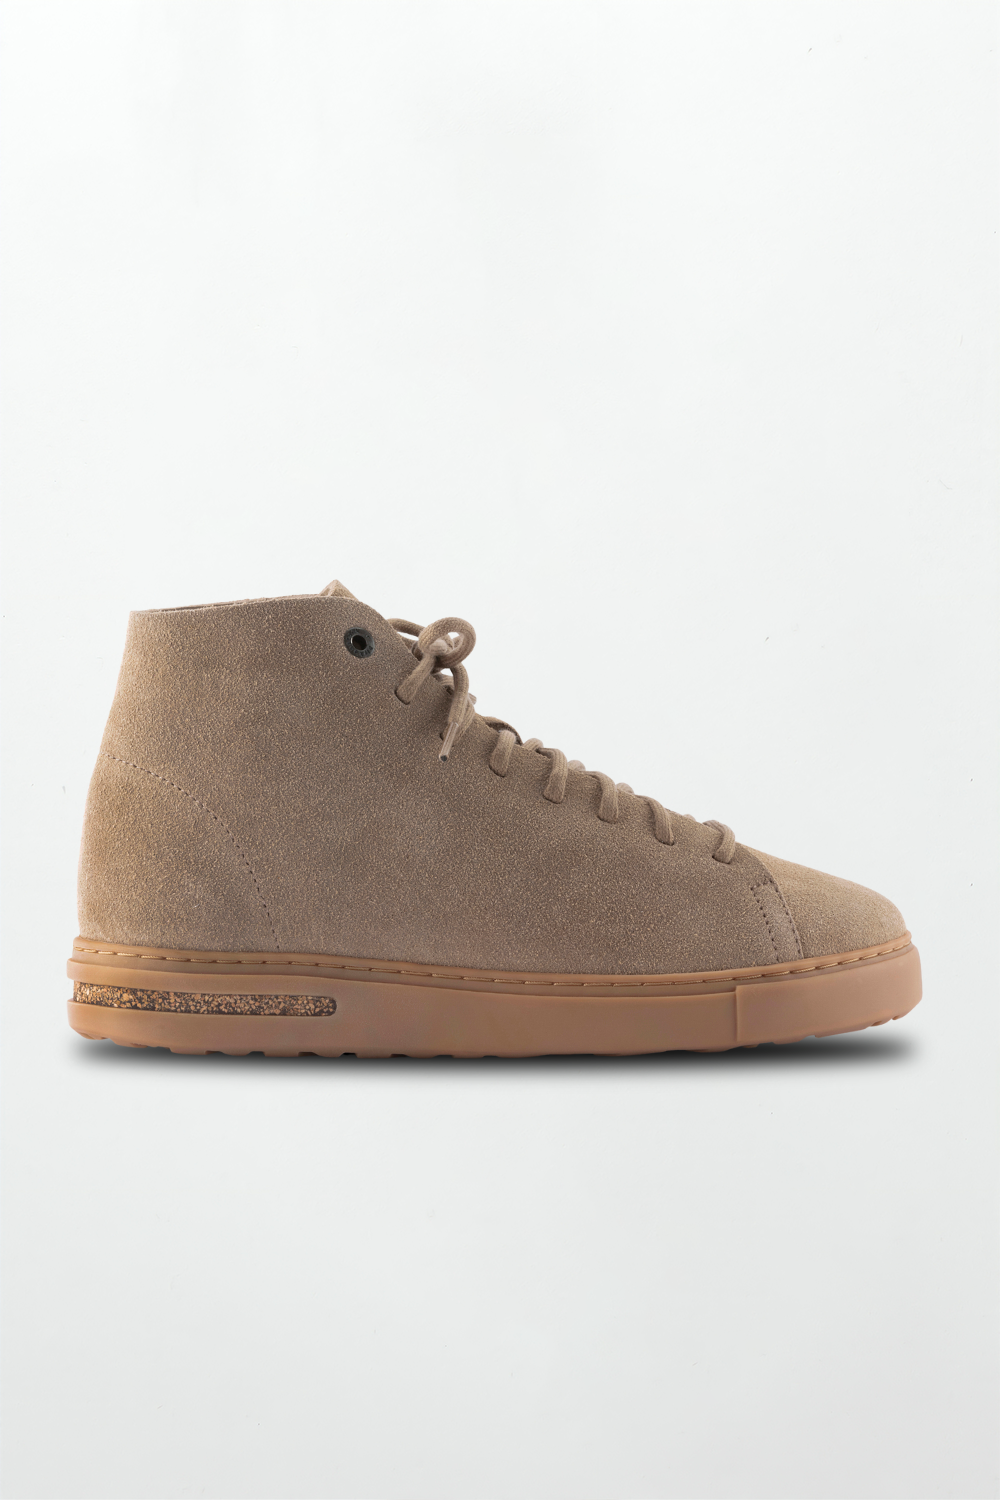 Bend Mid Nubuck Leather in Taupe